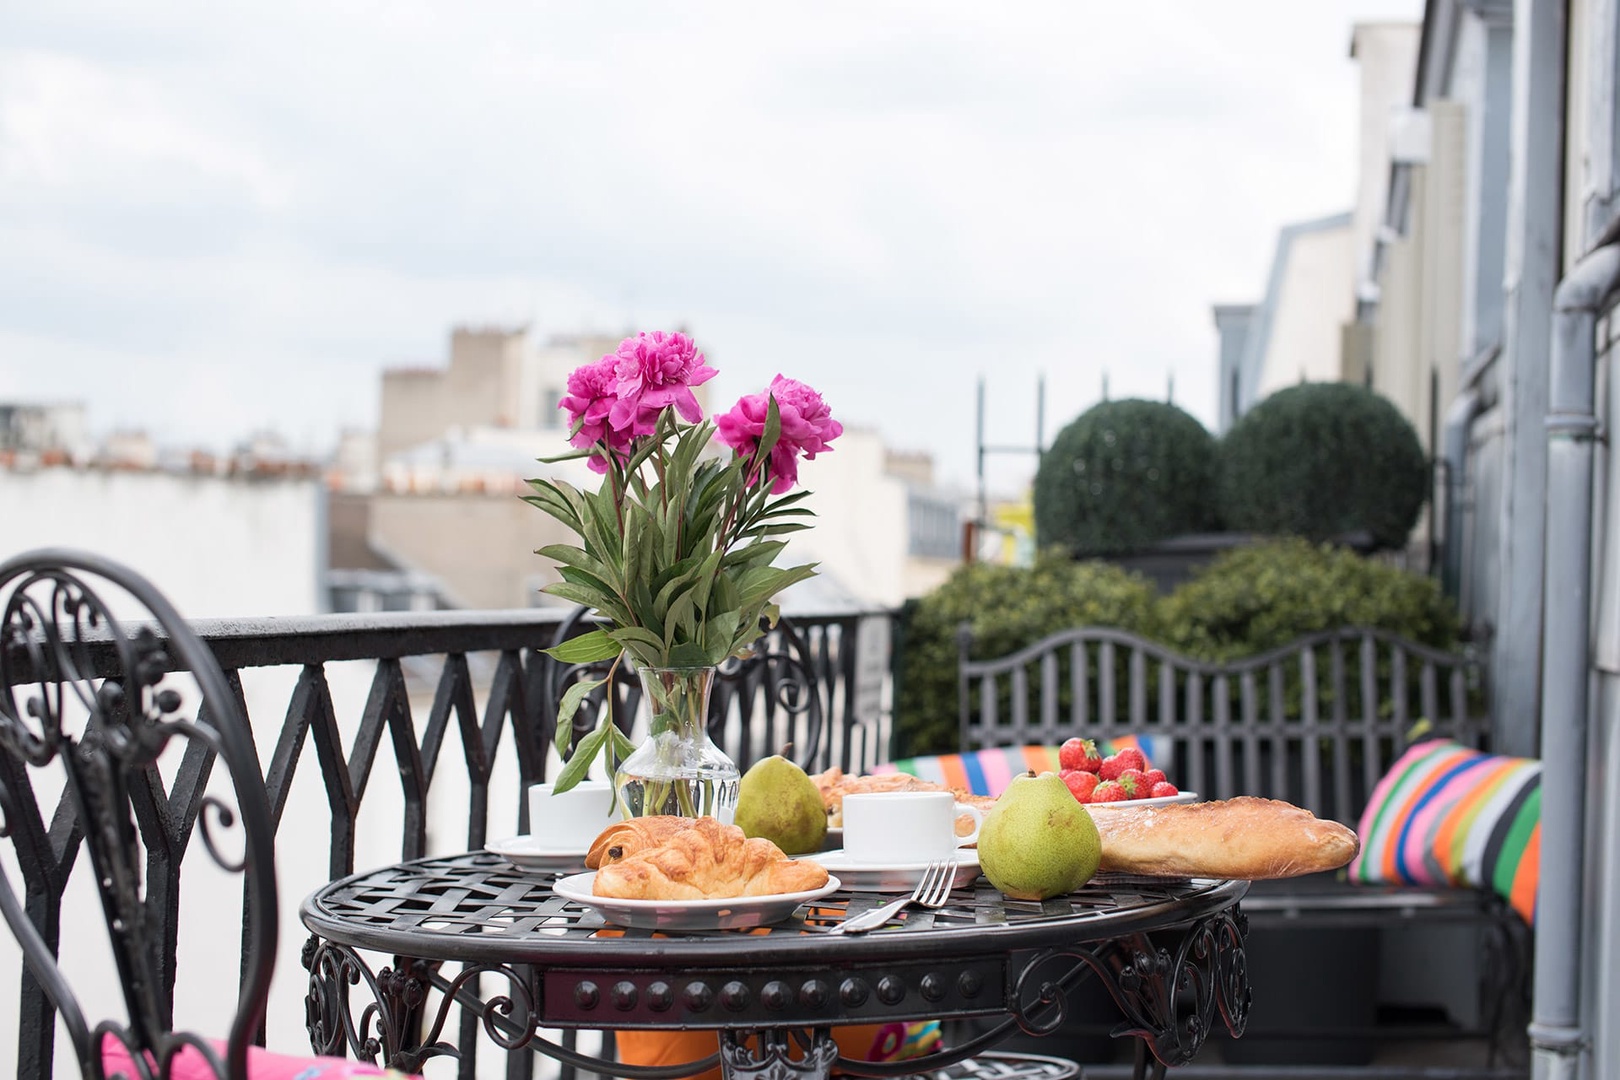 Greet the day over a leisurely breakfast on your balcony.